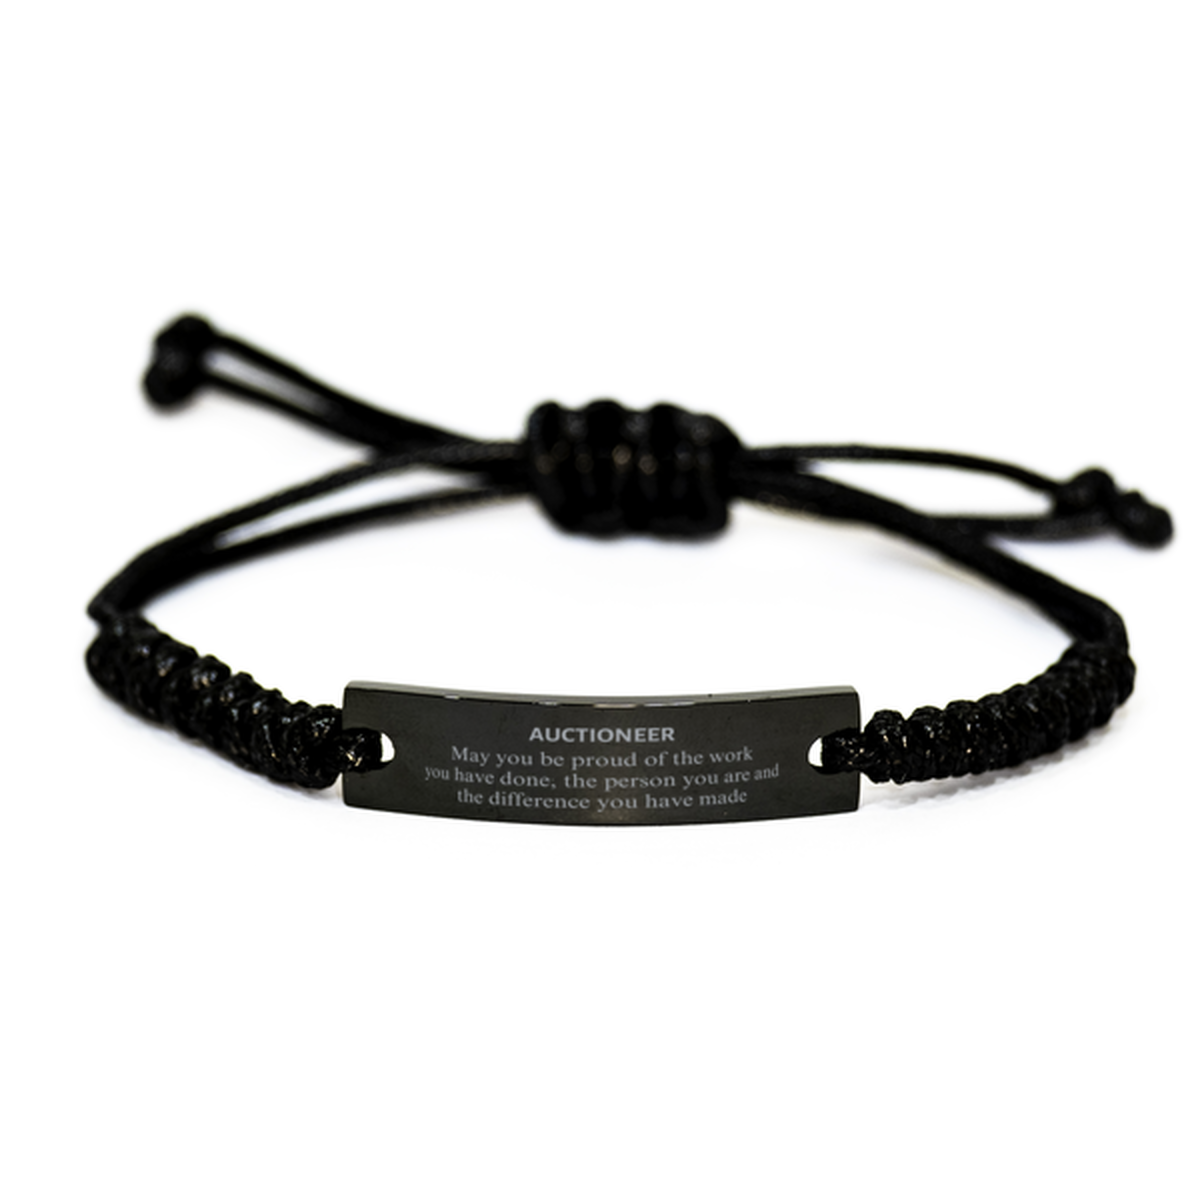 Auctioneer May you be proud of the work you have done, Retirement Auctioneer Black Rope Bracelet for Colleague Appreciation Gifts Amazing for Auctioneer